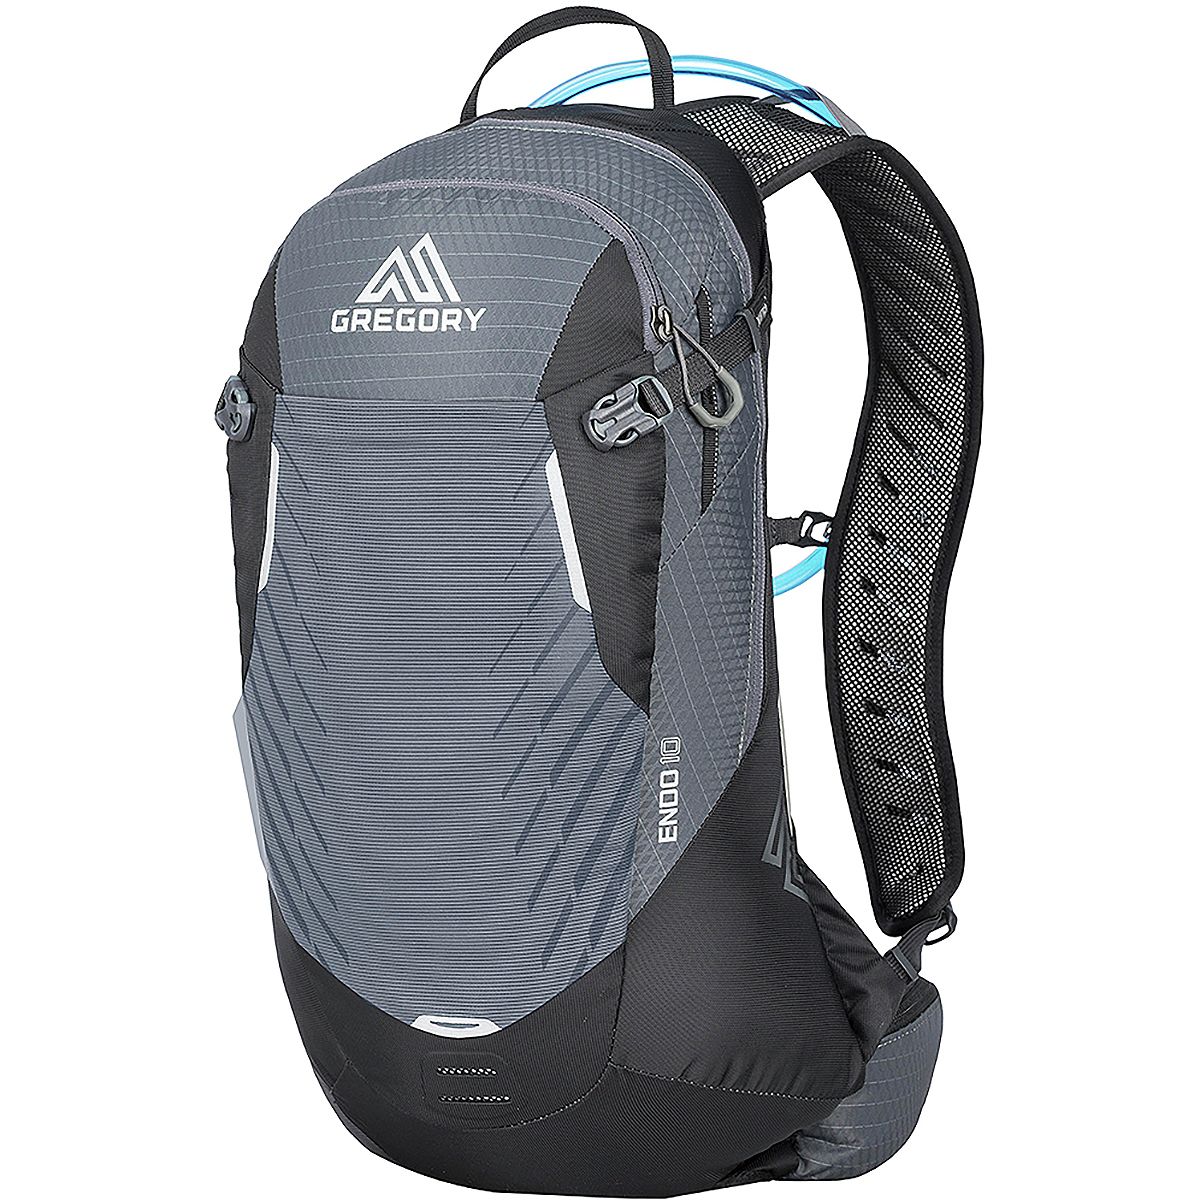 Gregory Endo 10L Hydration Backpack